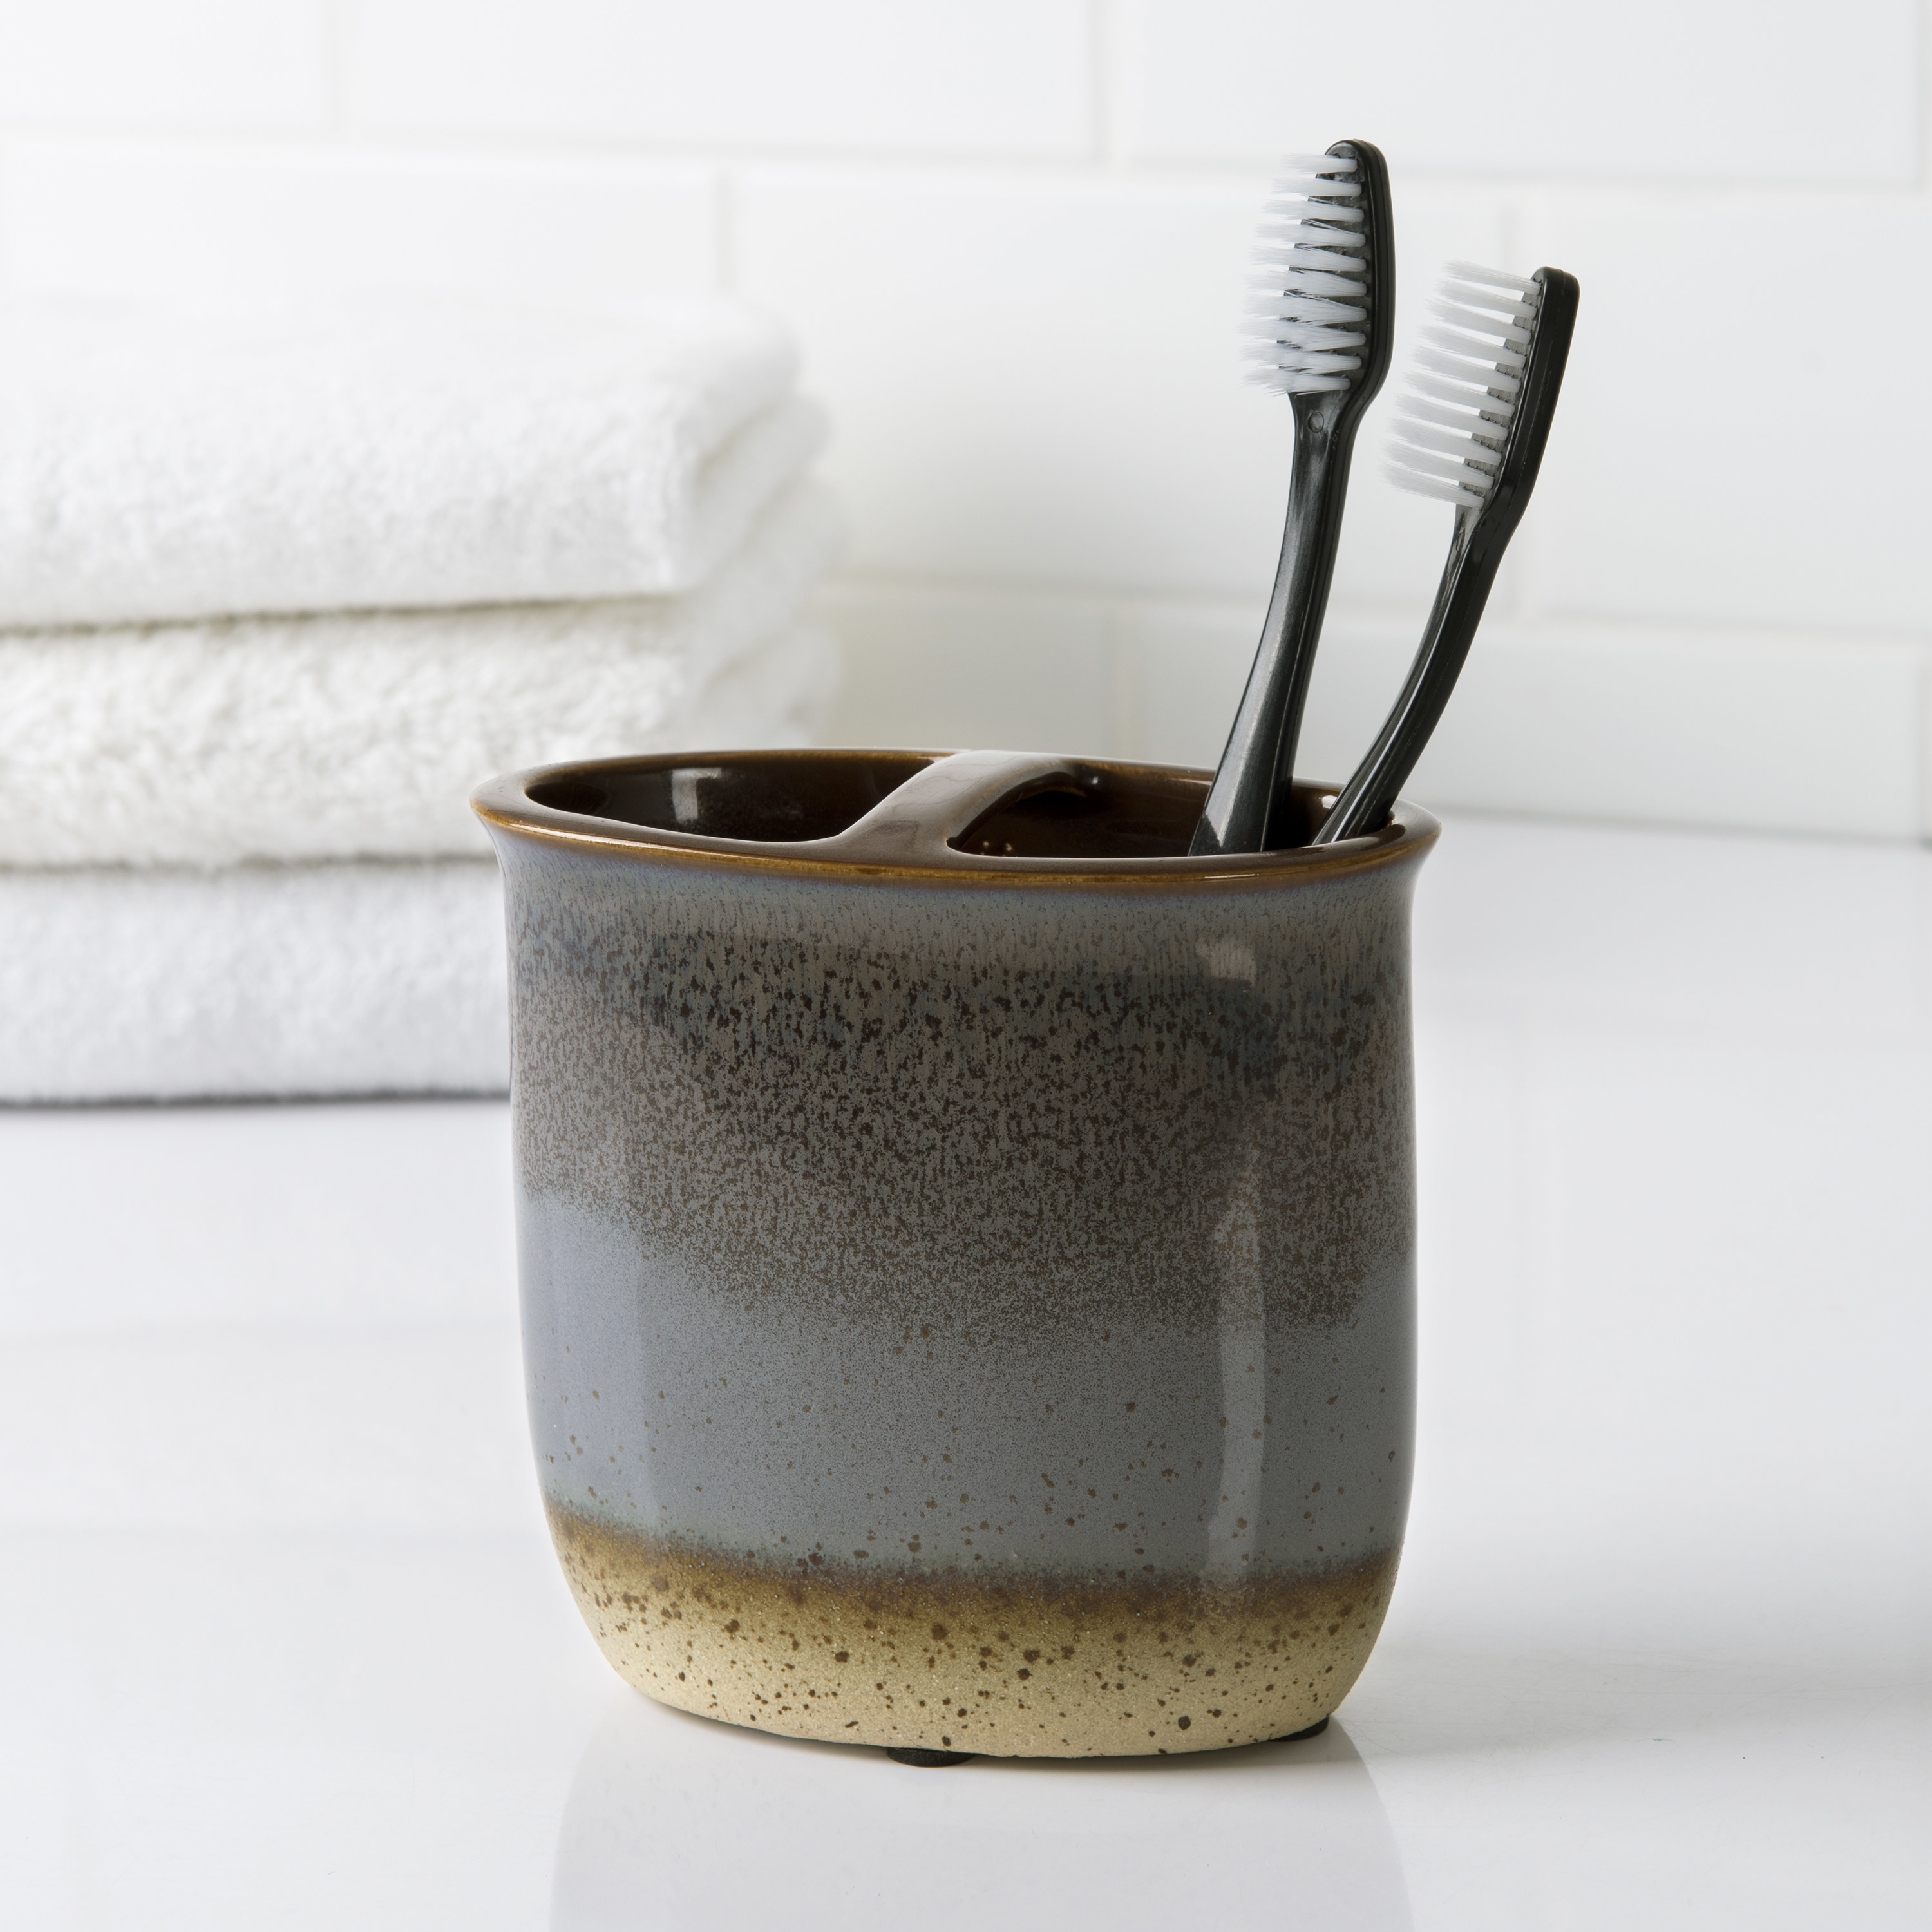 The ceramic toothbrush holder with two large openings 